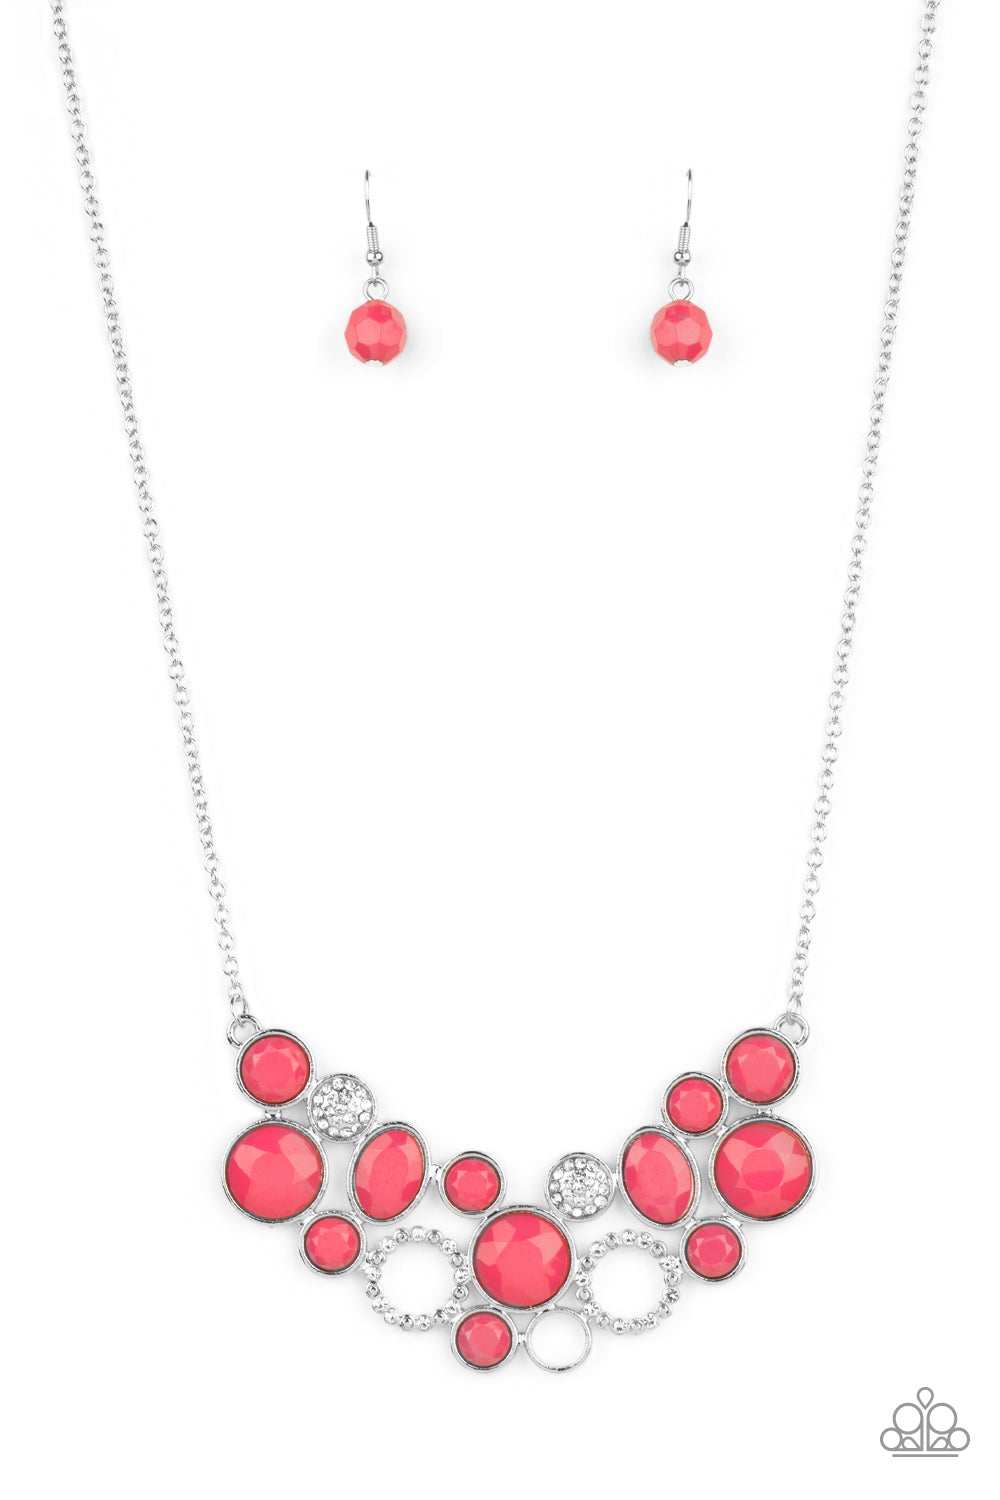 Extra Eloquent Pink Necklace - Paparazzi Accessories  A mismatched collection of faceted pink beaded frames and white rhinestone embellished accents delicately connect into a bubbly clustered pendant below the collar, creating a colorful statement piece. Features an adjustable clasp closure.  All Paparazzi Accessories are lead free and nickel free!  Sold as one individual necklace. Includes one pair of matching earrings.